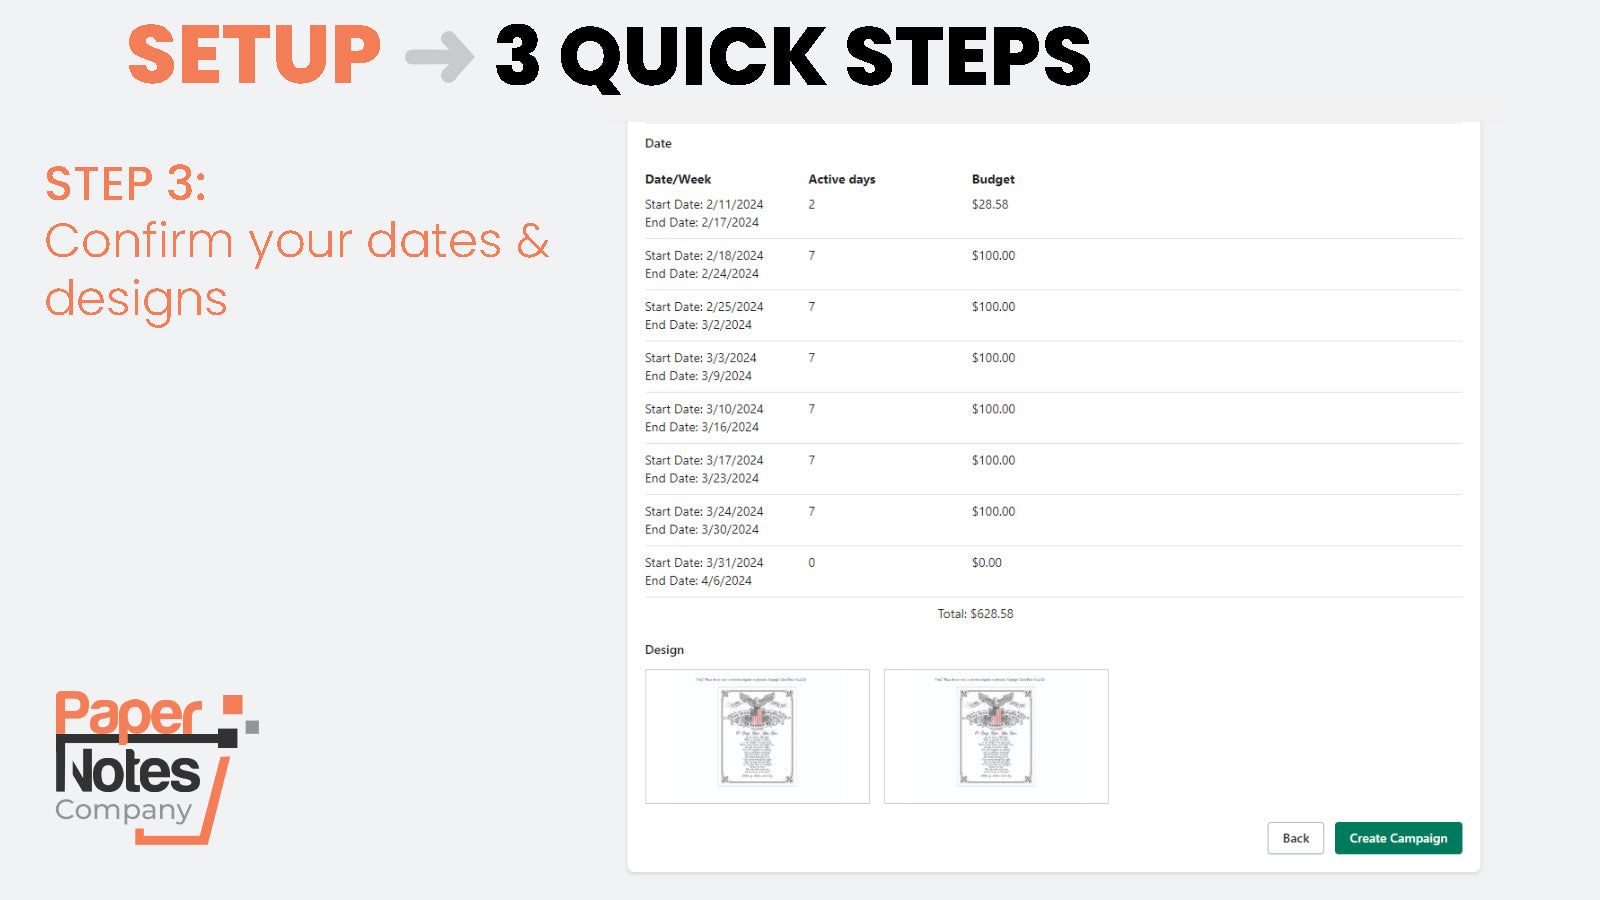 Step 3 Confirm dates and design